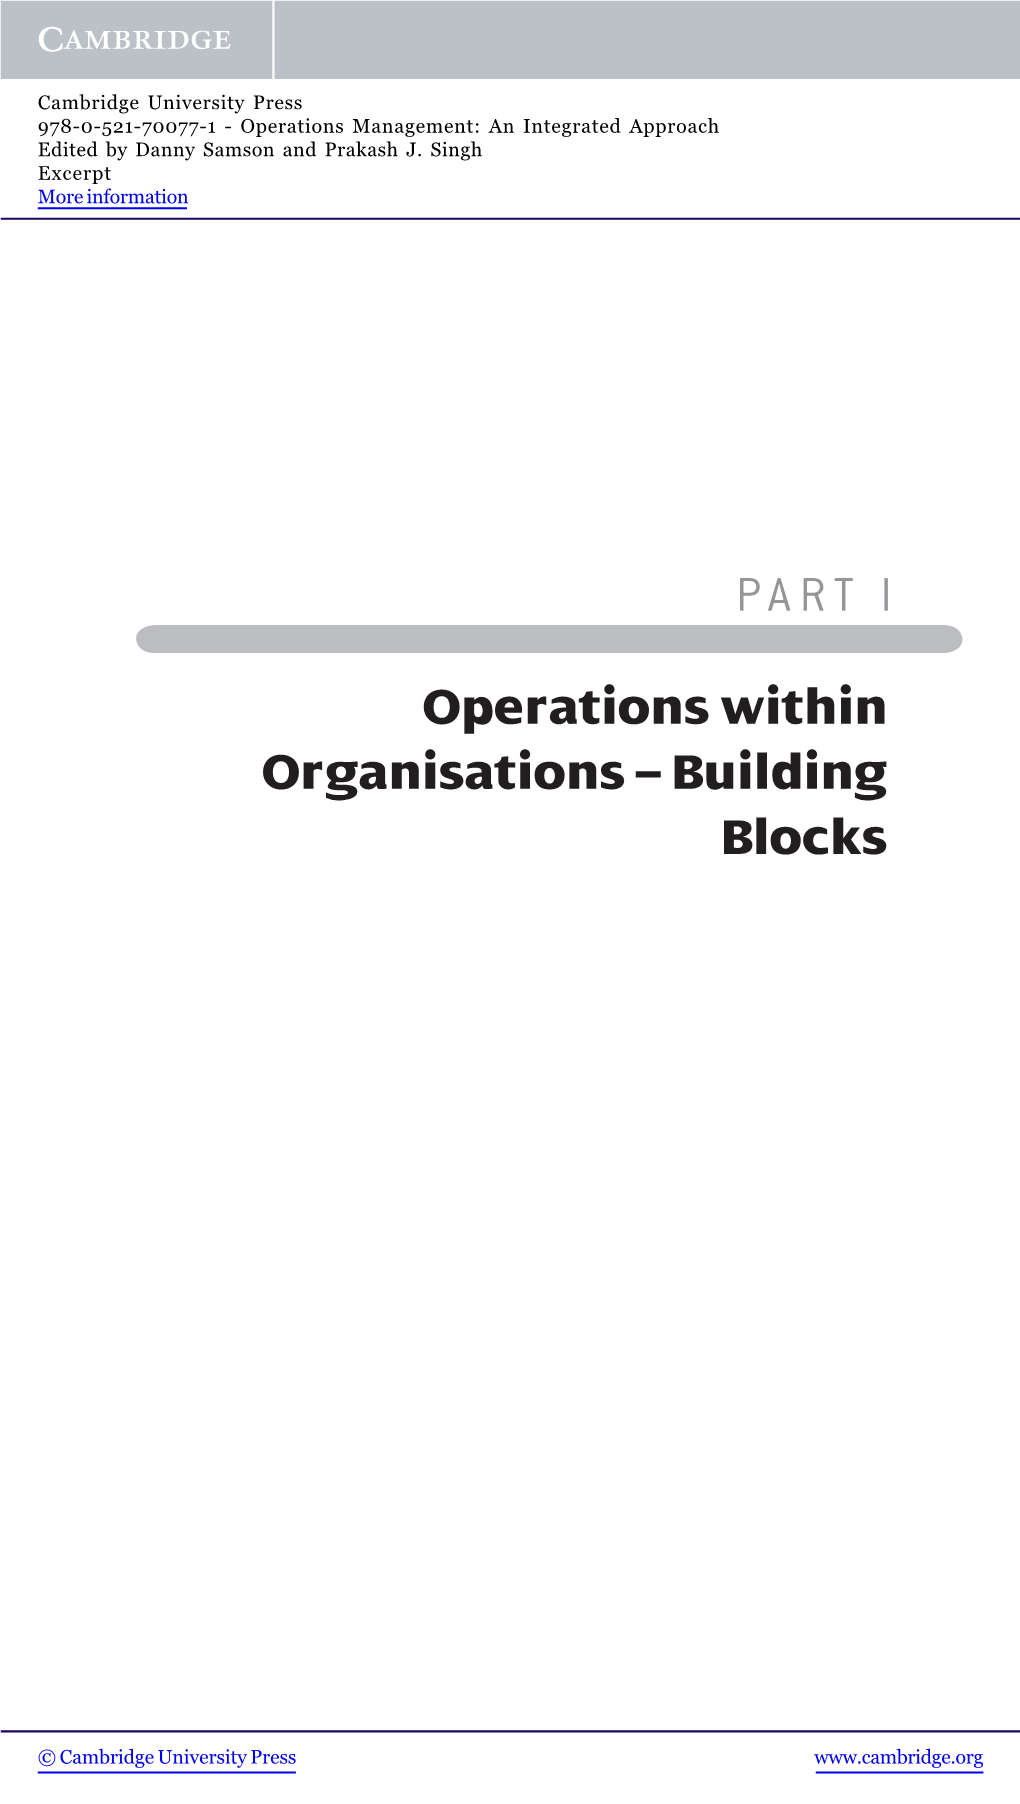 PART I Operations Within Organisations – Building Blocks